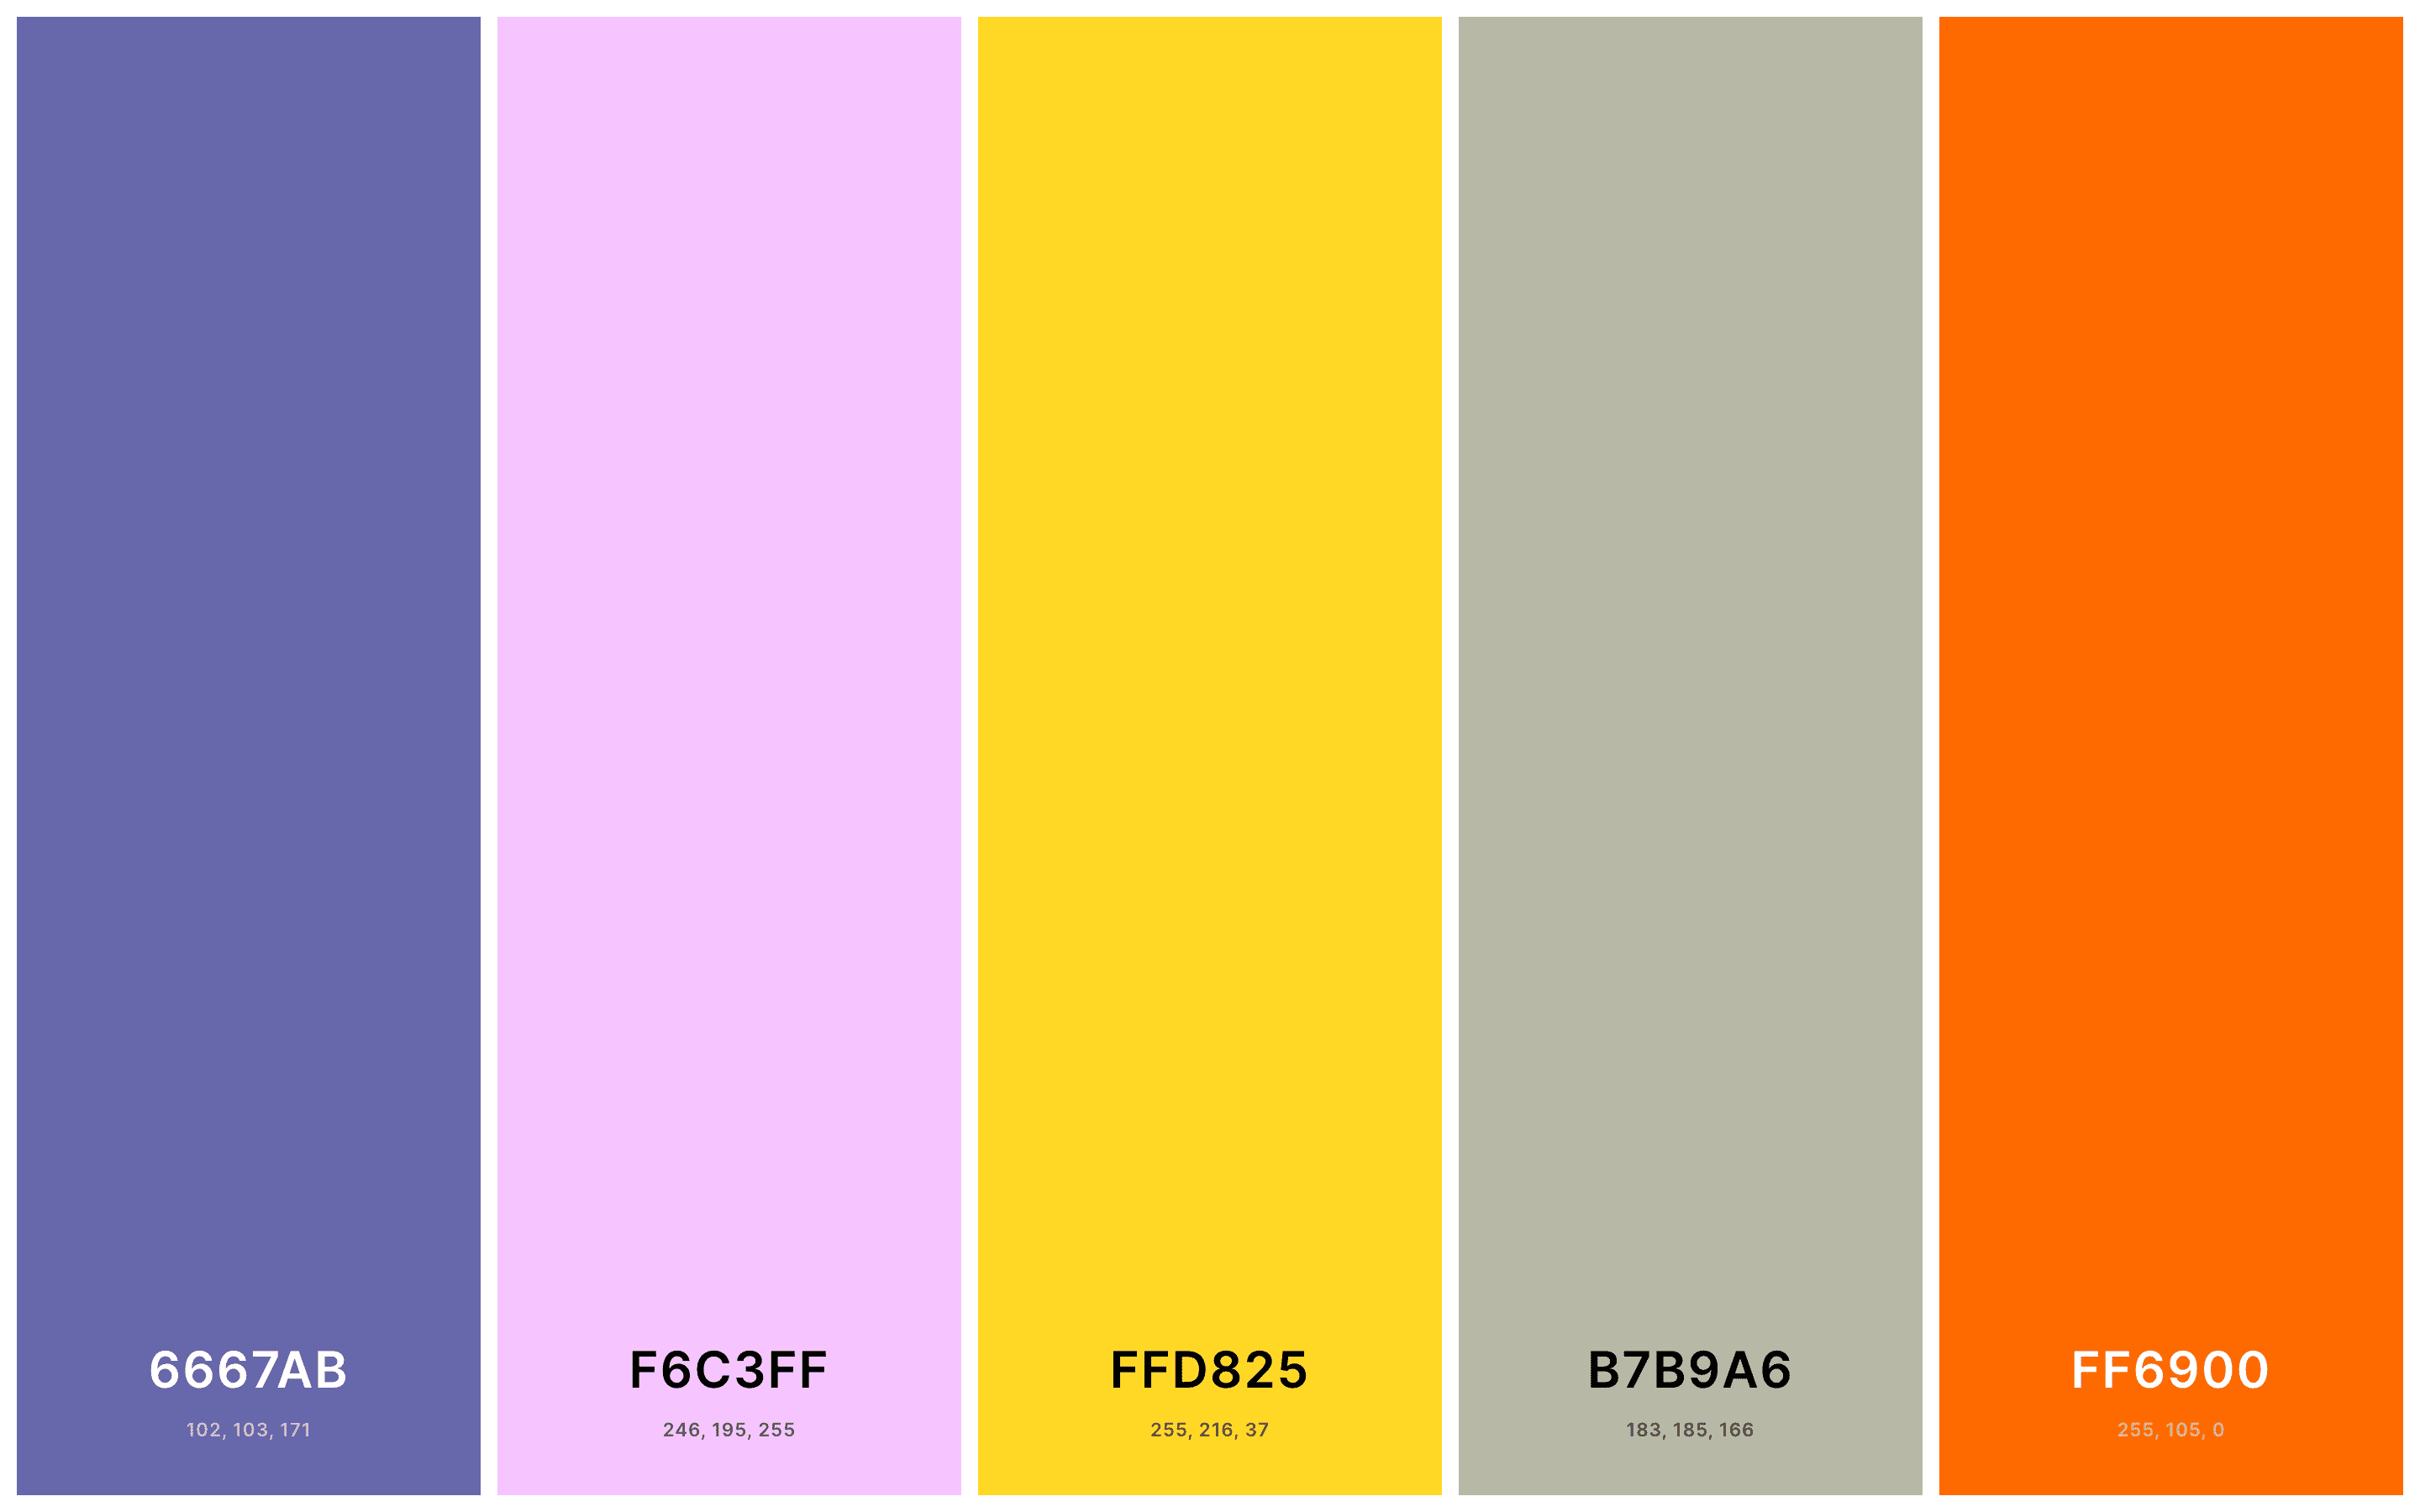 Shades of Pantone Colors Poster for Sale by AprilSLDesigns  Pantone  colour palettes, Pantone color chart, Pantone palette